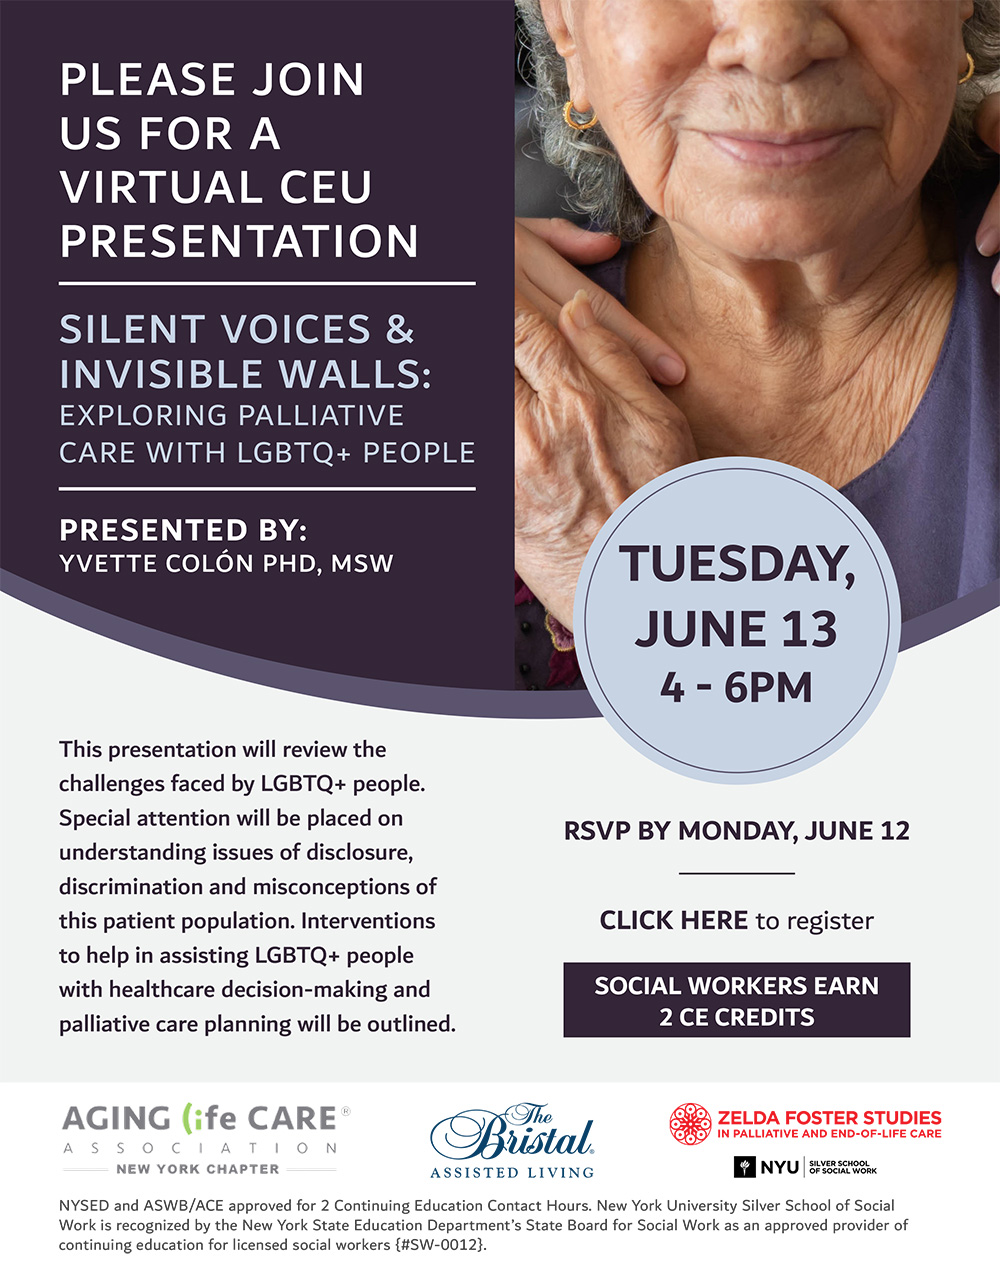 Silent Voices and Invisible Walls event flyer